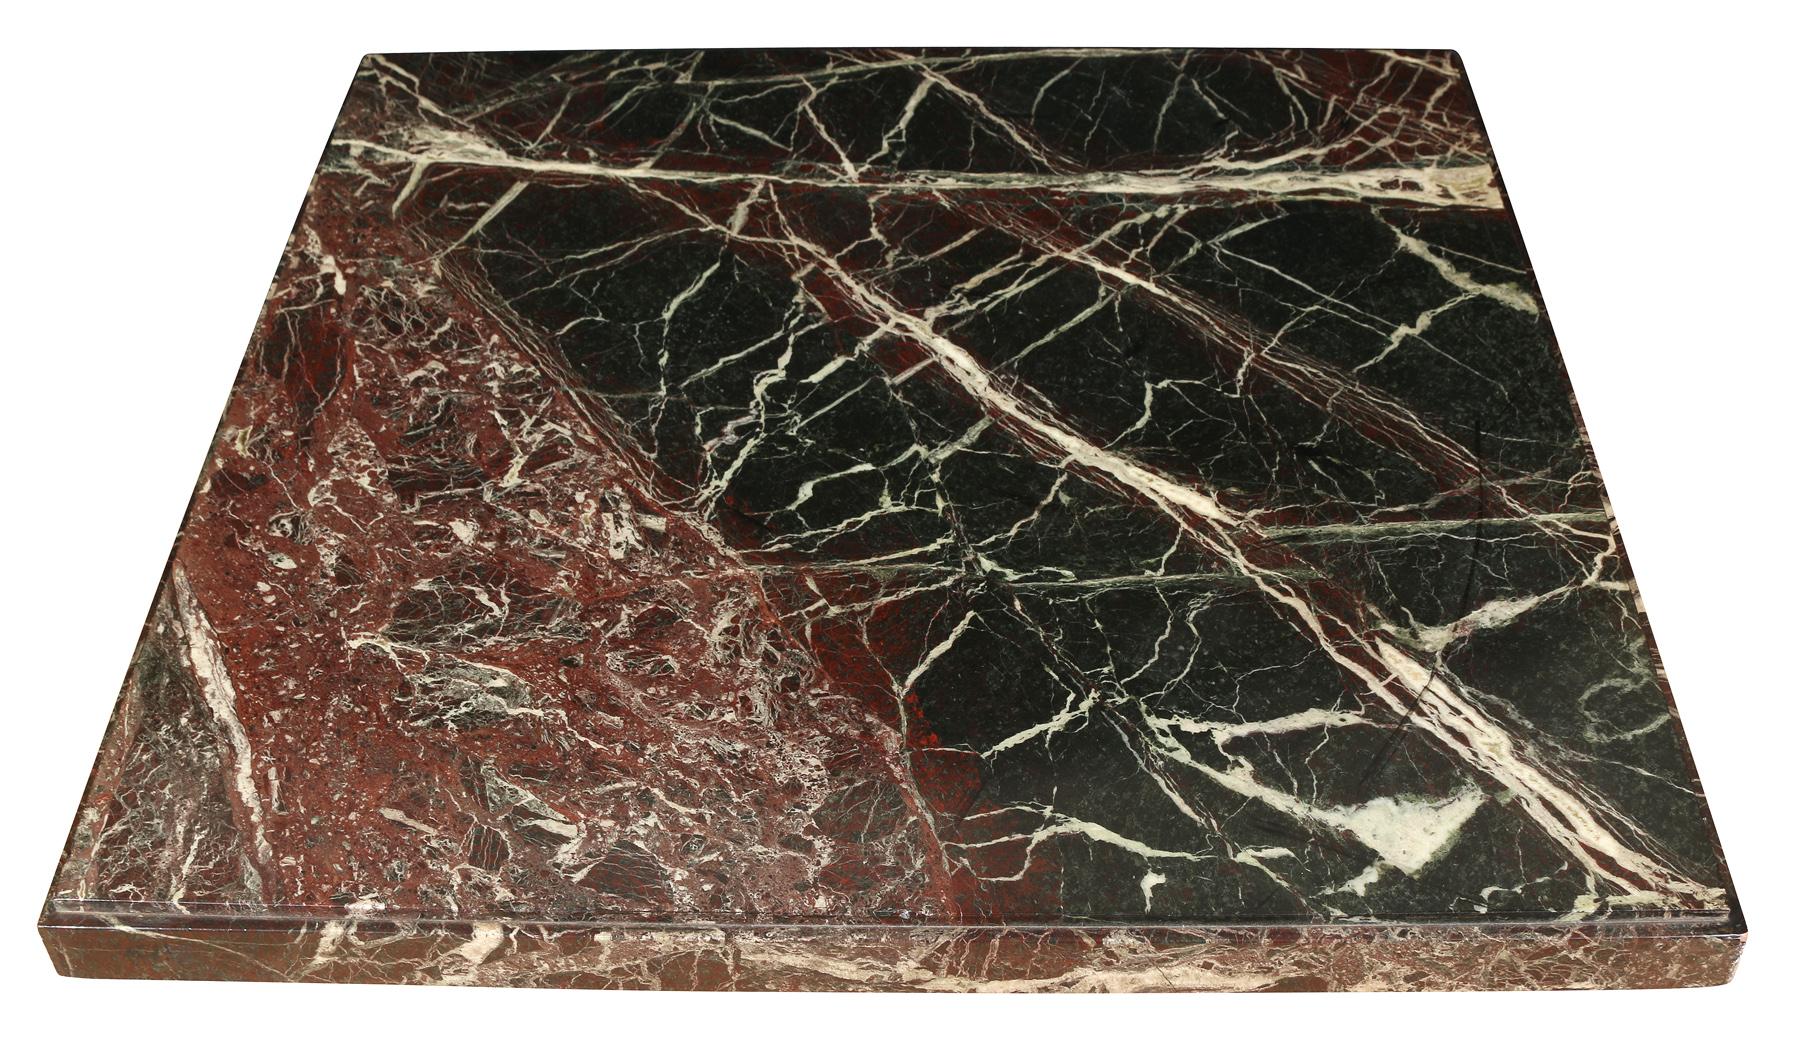 This sleek table consists of a pedestal base supporting a square solid marble top with a beveled edge.  The veining, in rich brown, black, and white make this a statement piece that can work well in traditional or contemporary space.  